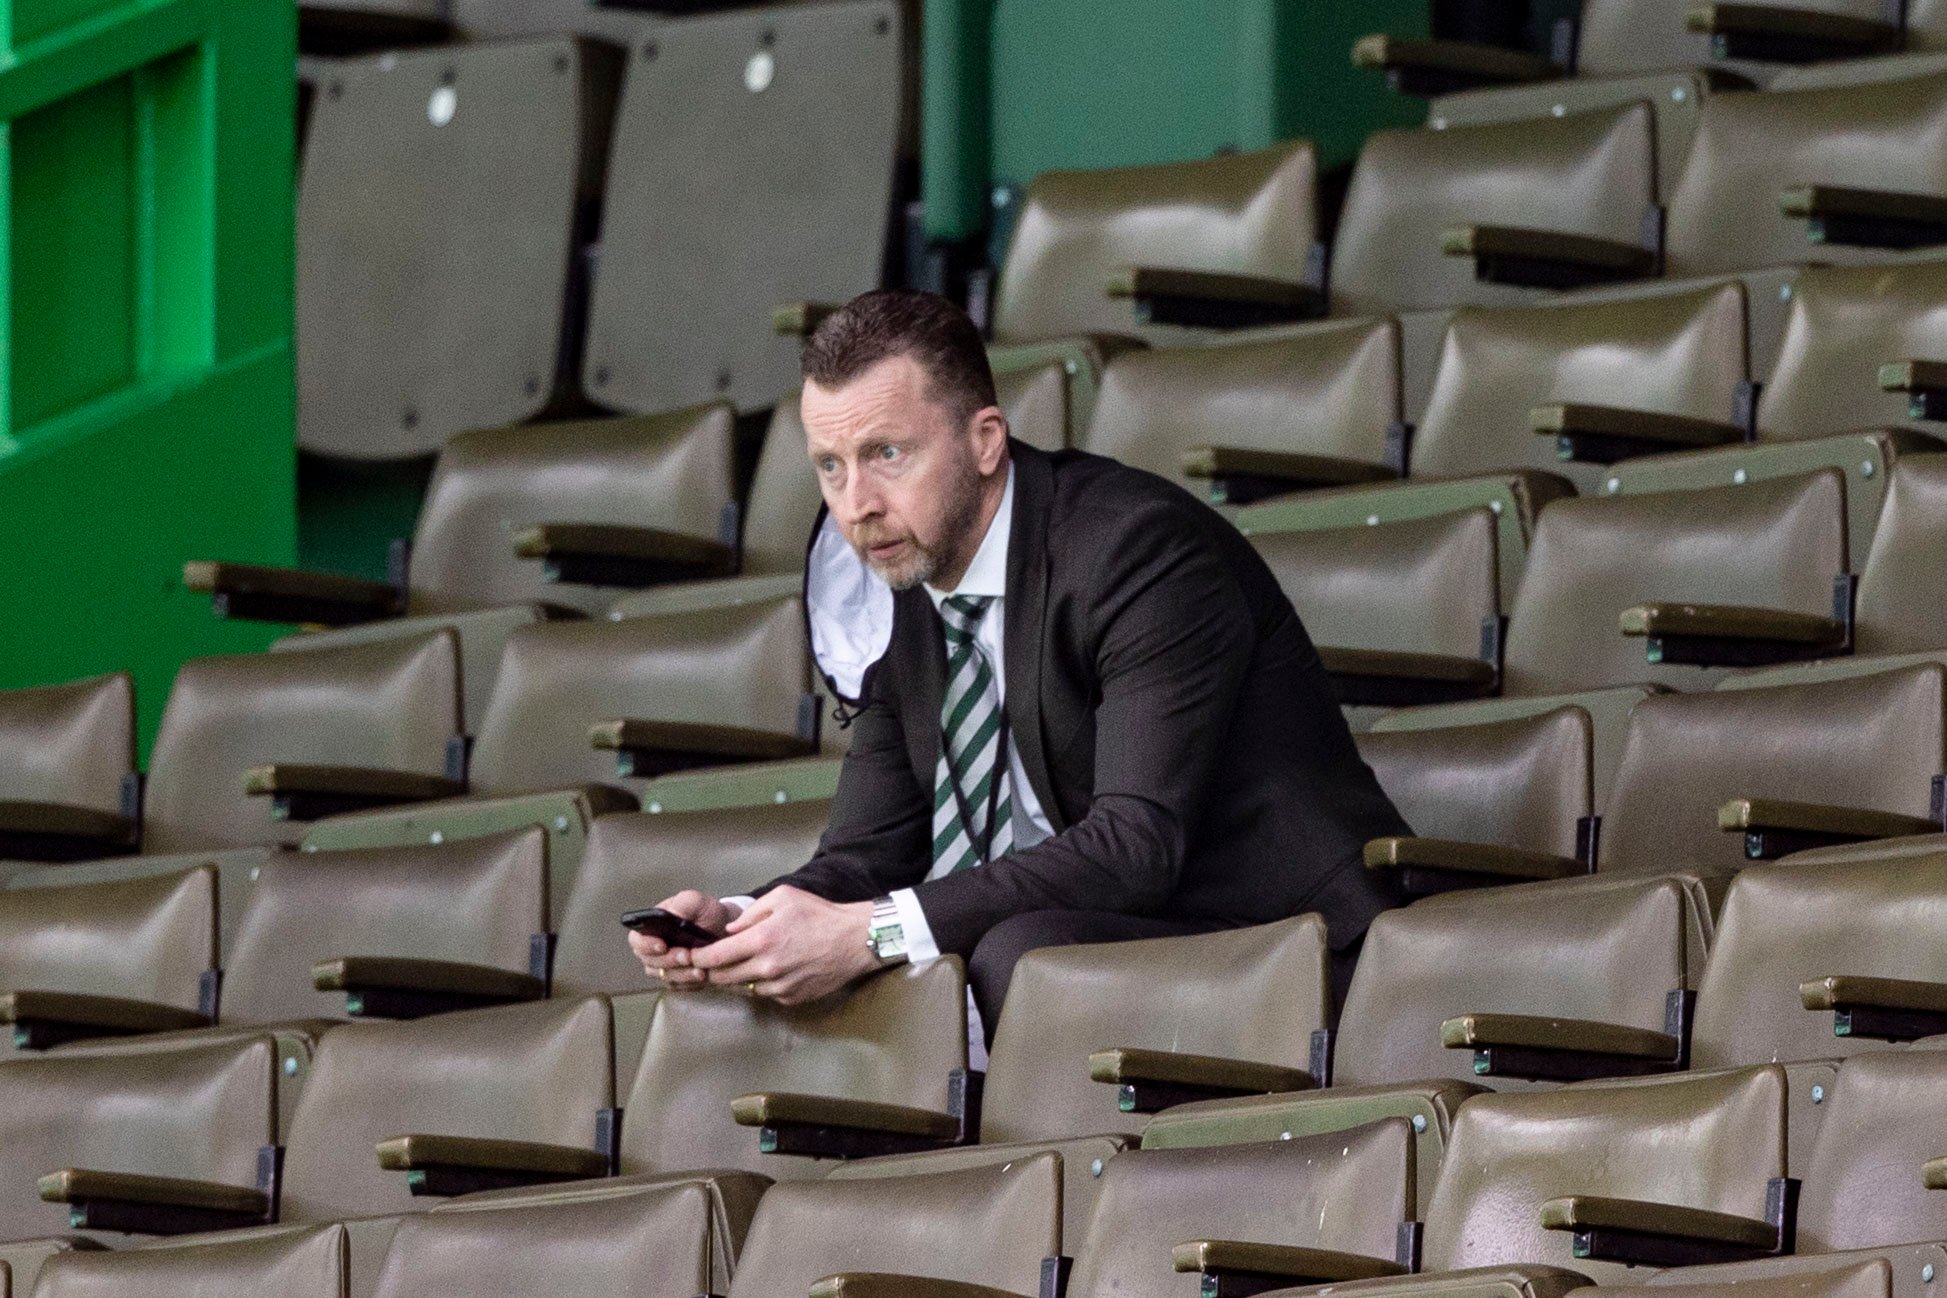 Lee Naylor discusses previous contact with Hammond; will pitch players to Celtic this summer